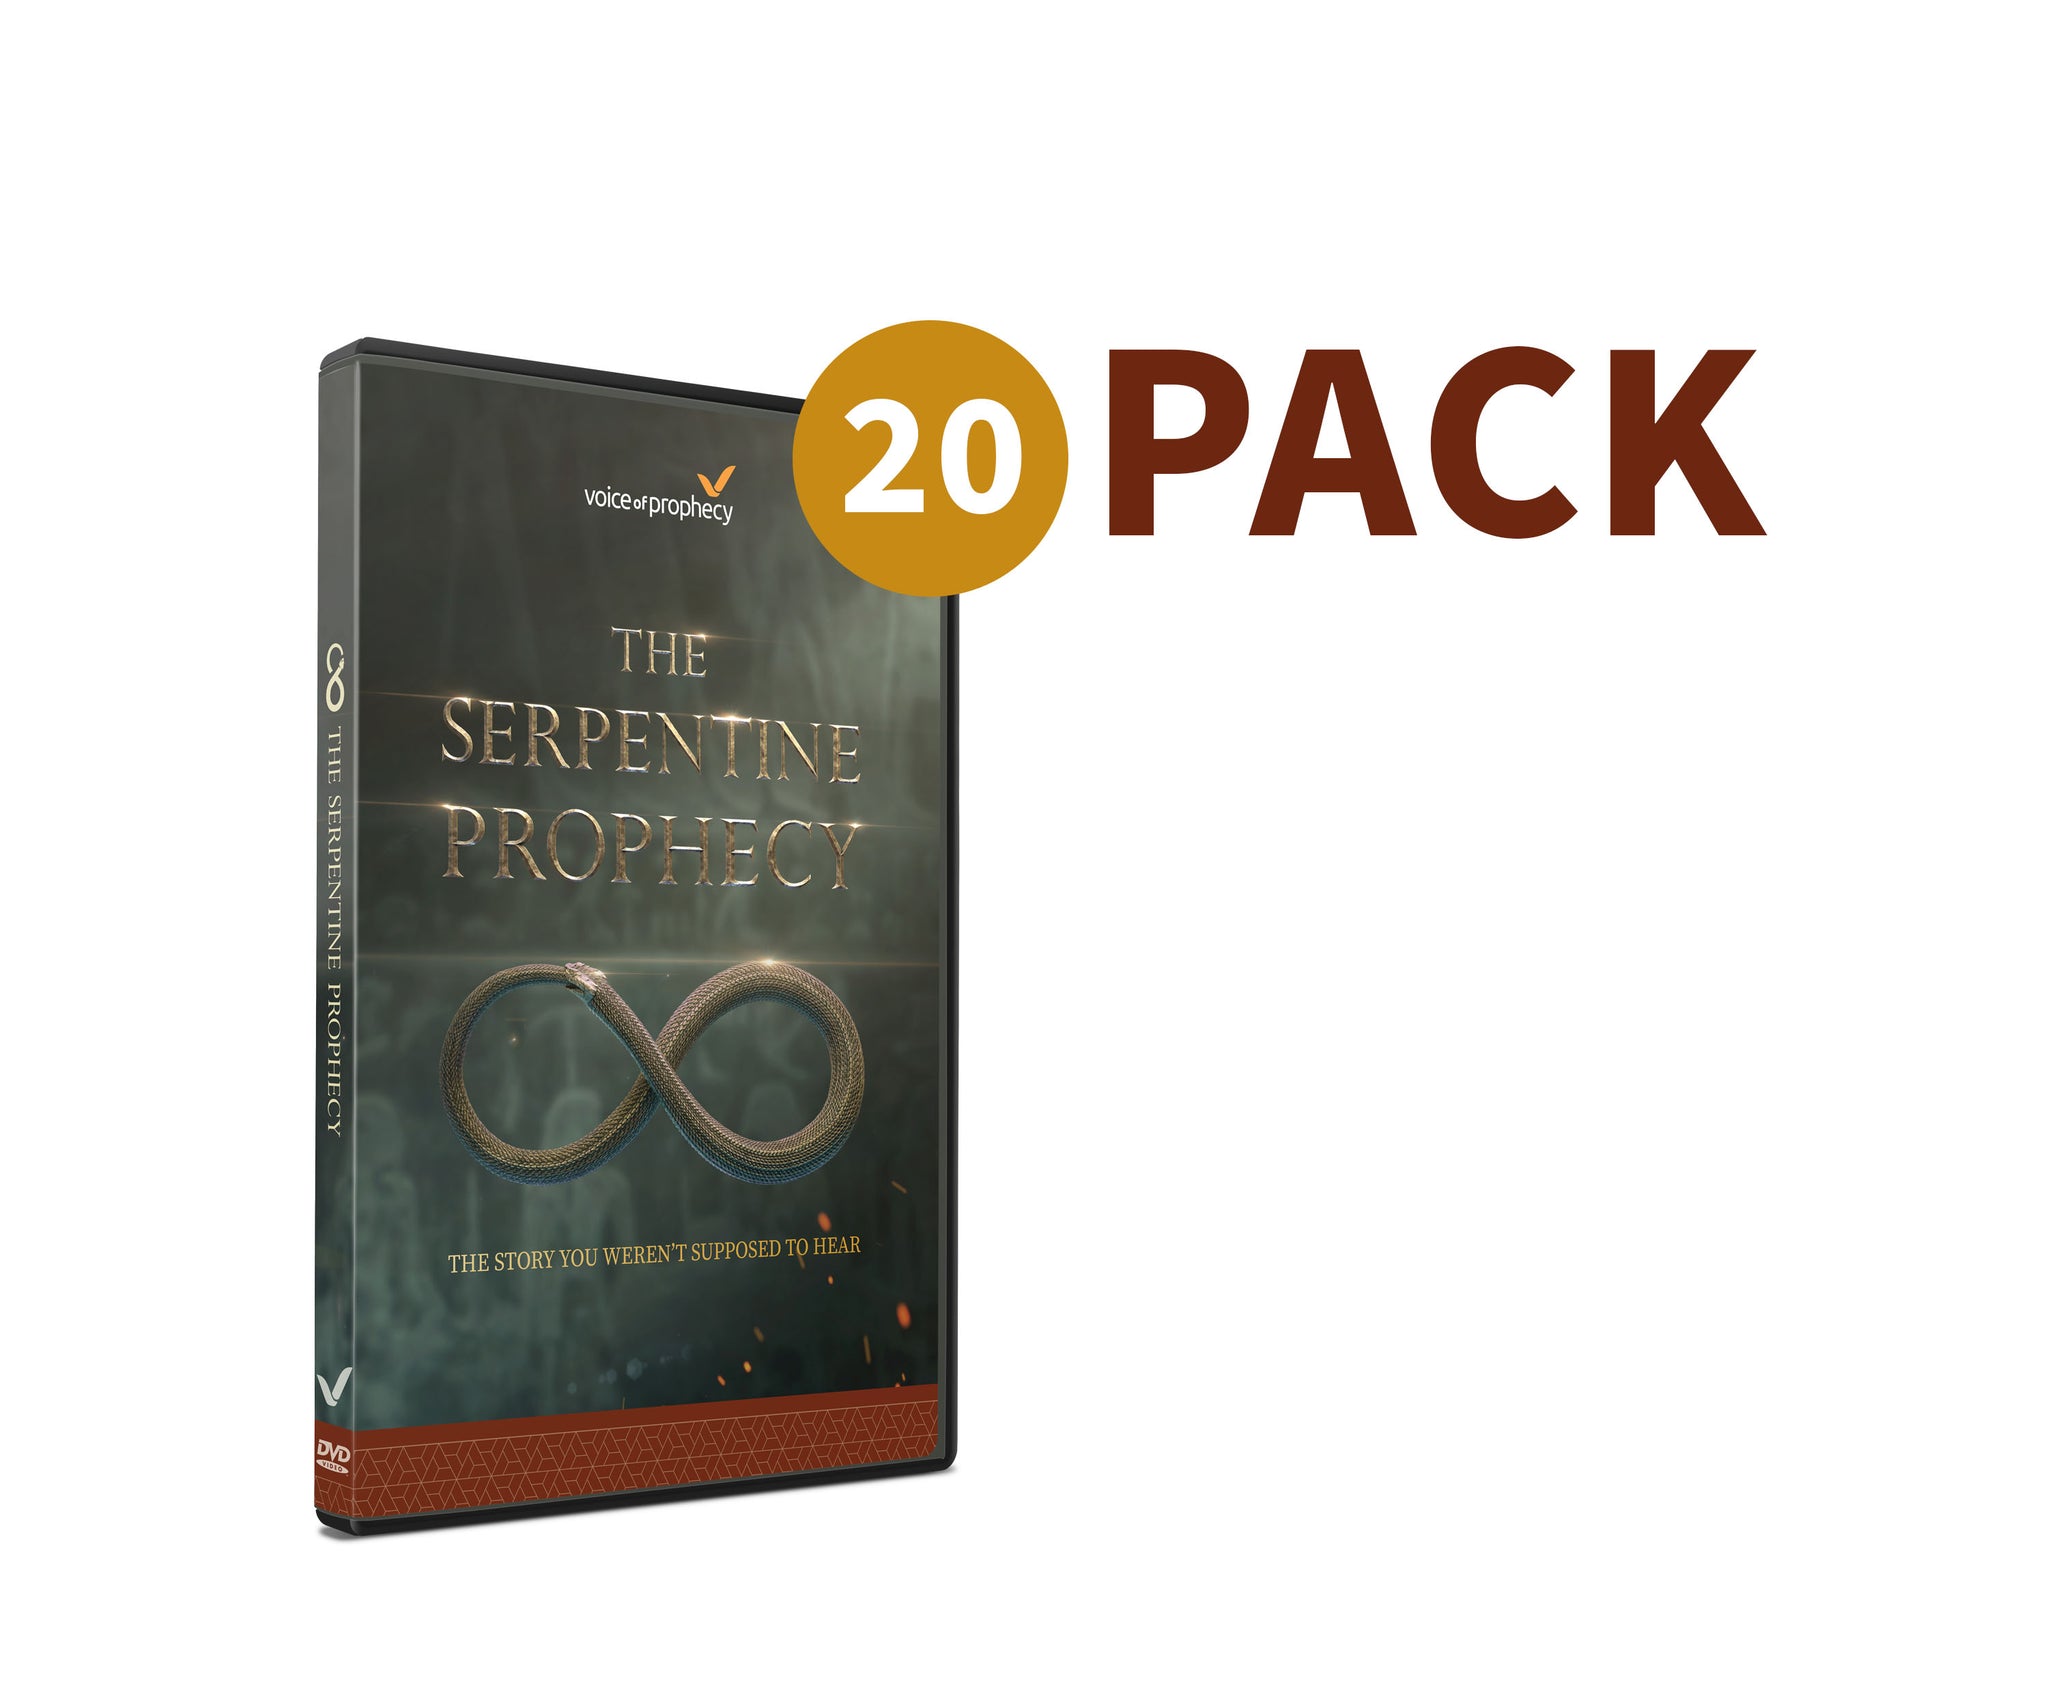 The Serpentine Prophecy DVD (20 Pack)